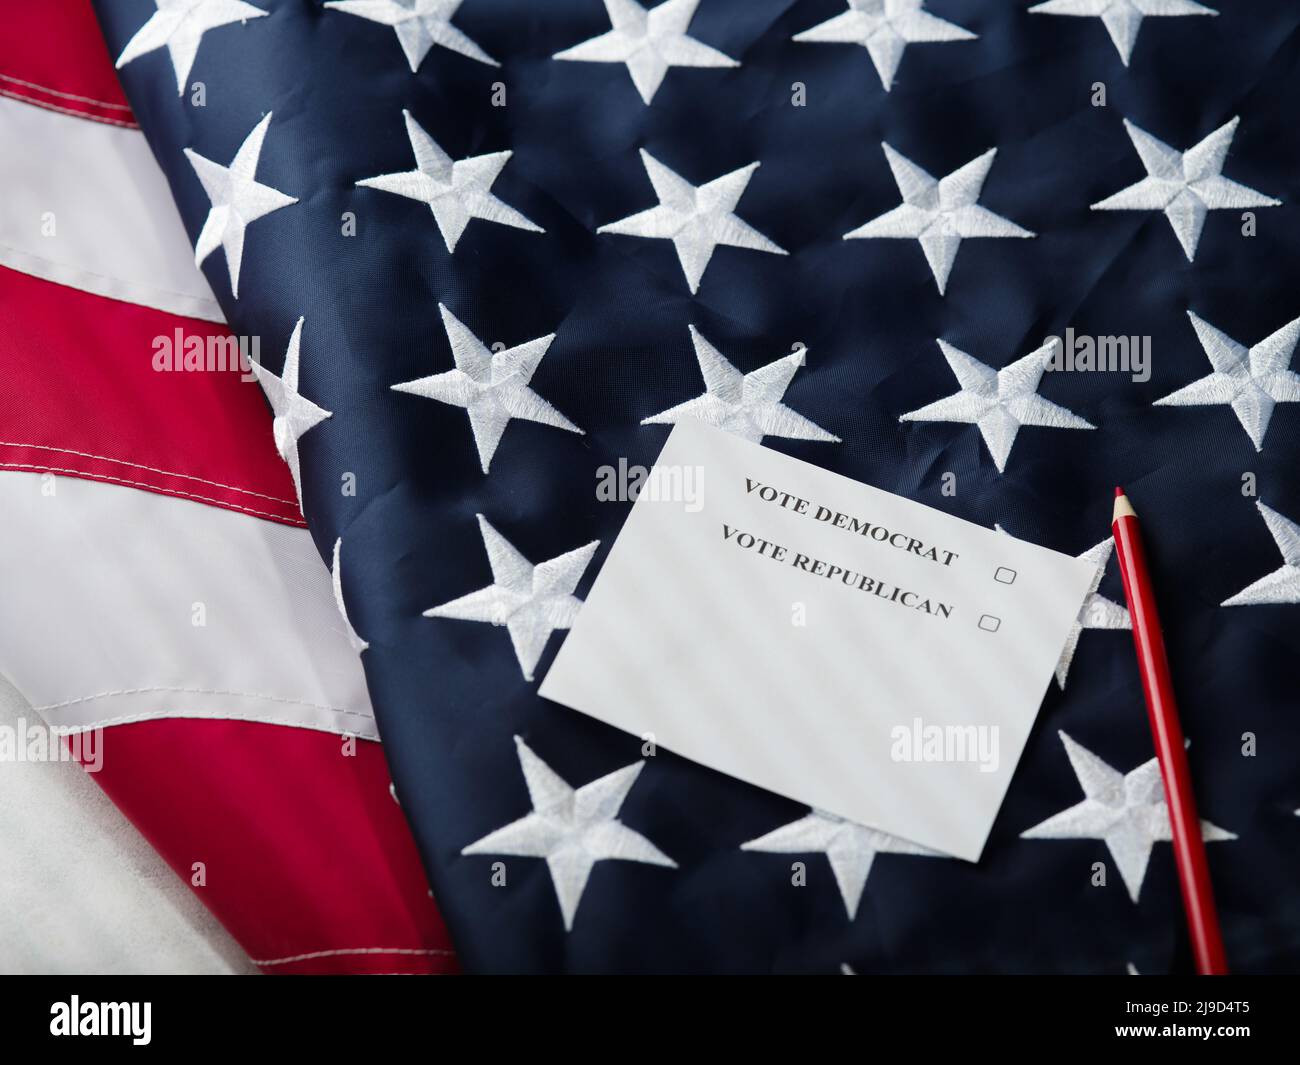 On the American flag, a pencil and a call - vote democracy, vote Republicans. Election campaign, democracy, independence, debate, voting, elections, U Stock Photo